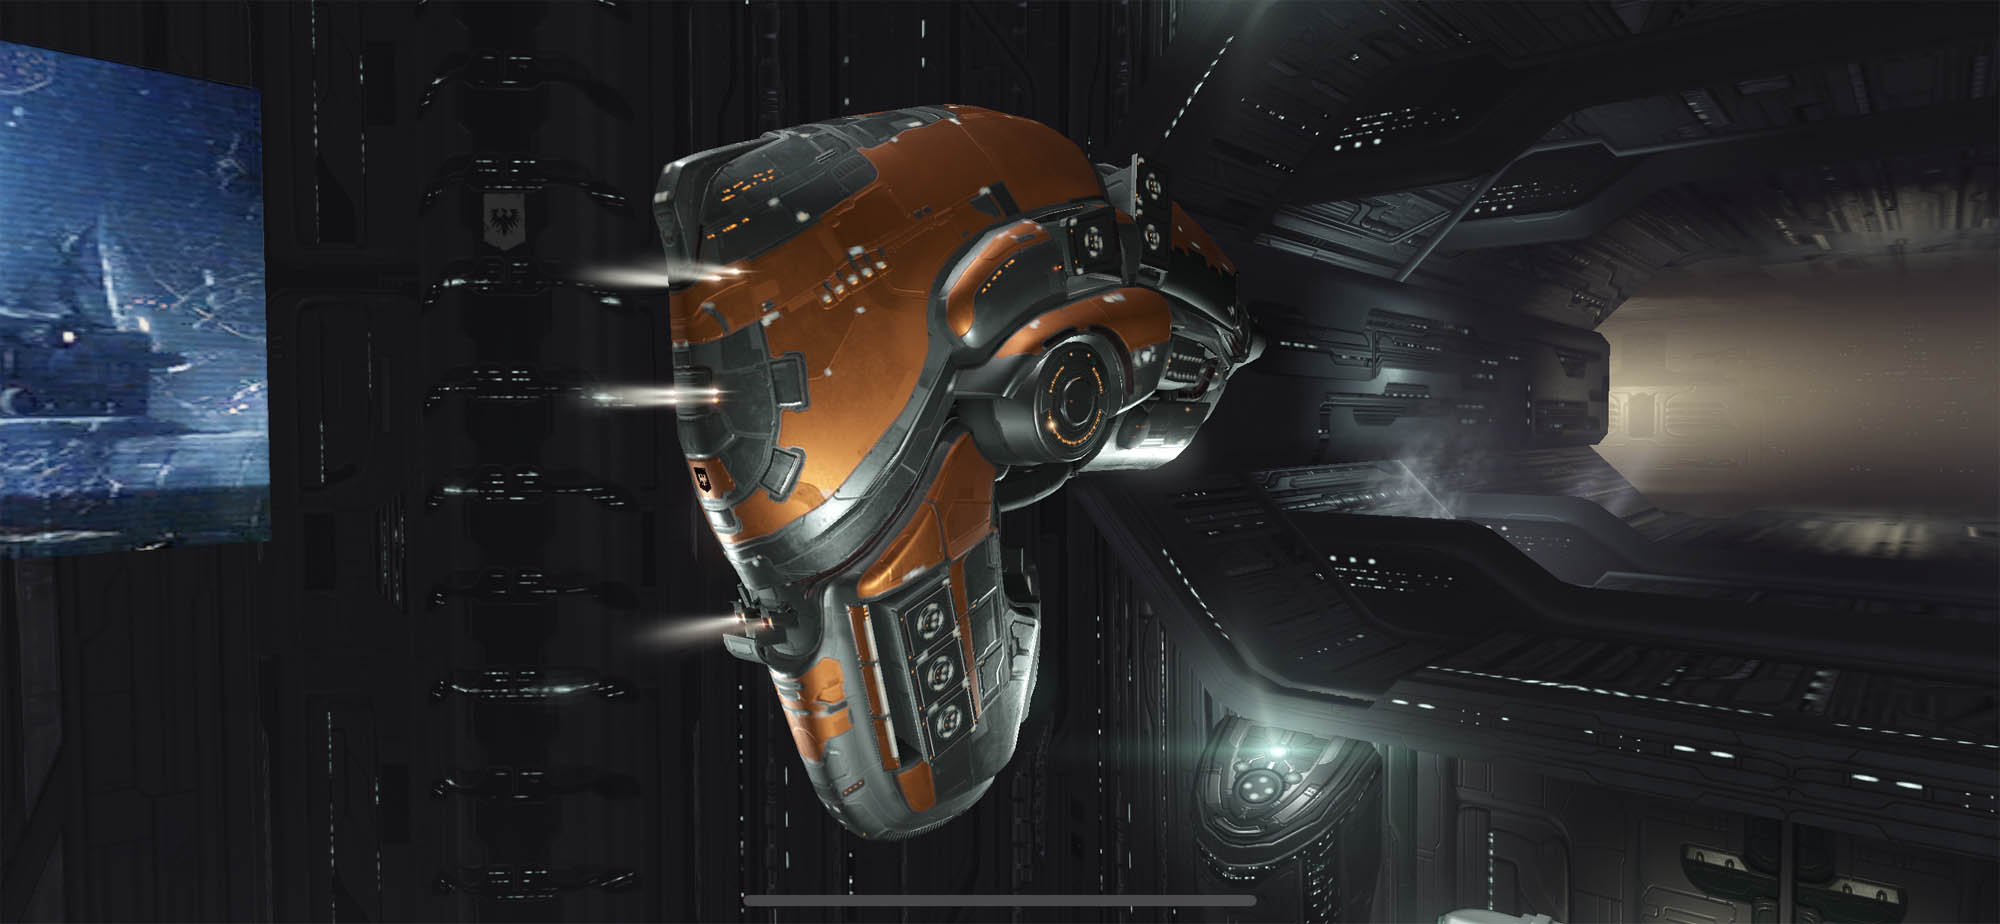 The 'EVE Online' mobile MMO spin-off 'EVE Echoes' is launching in